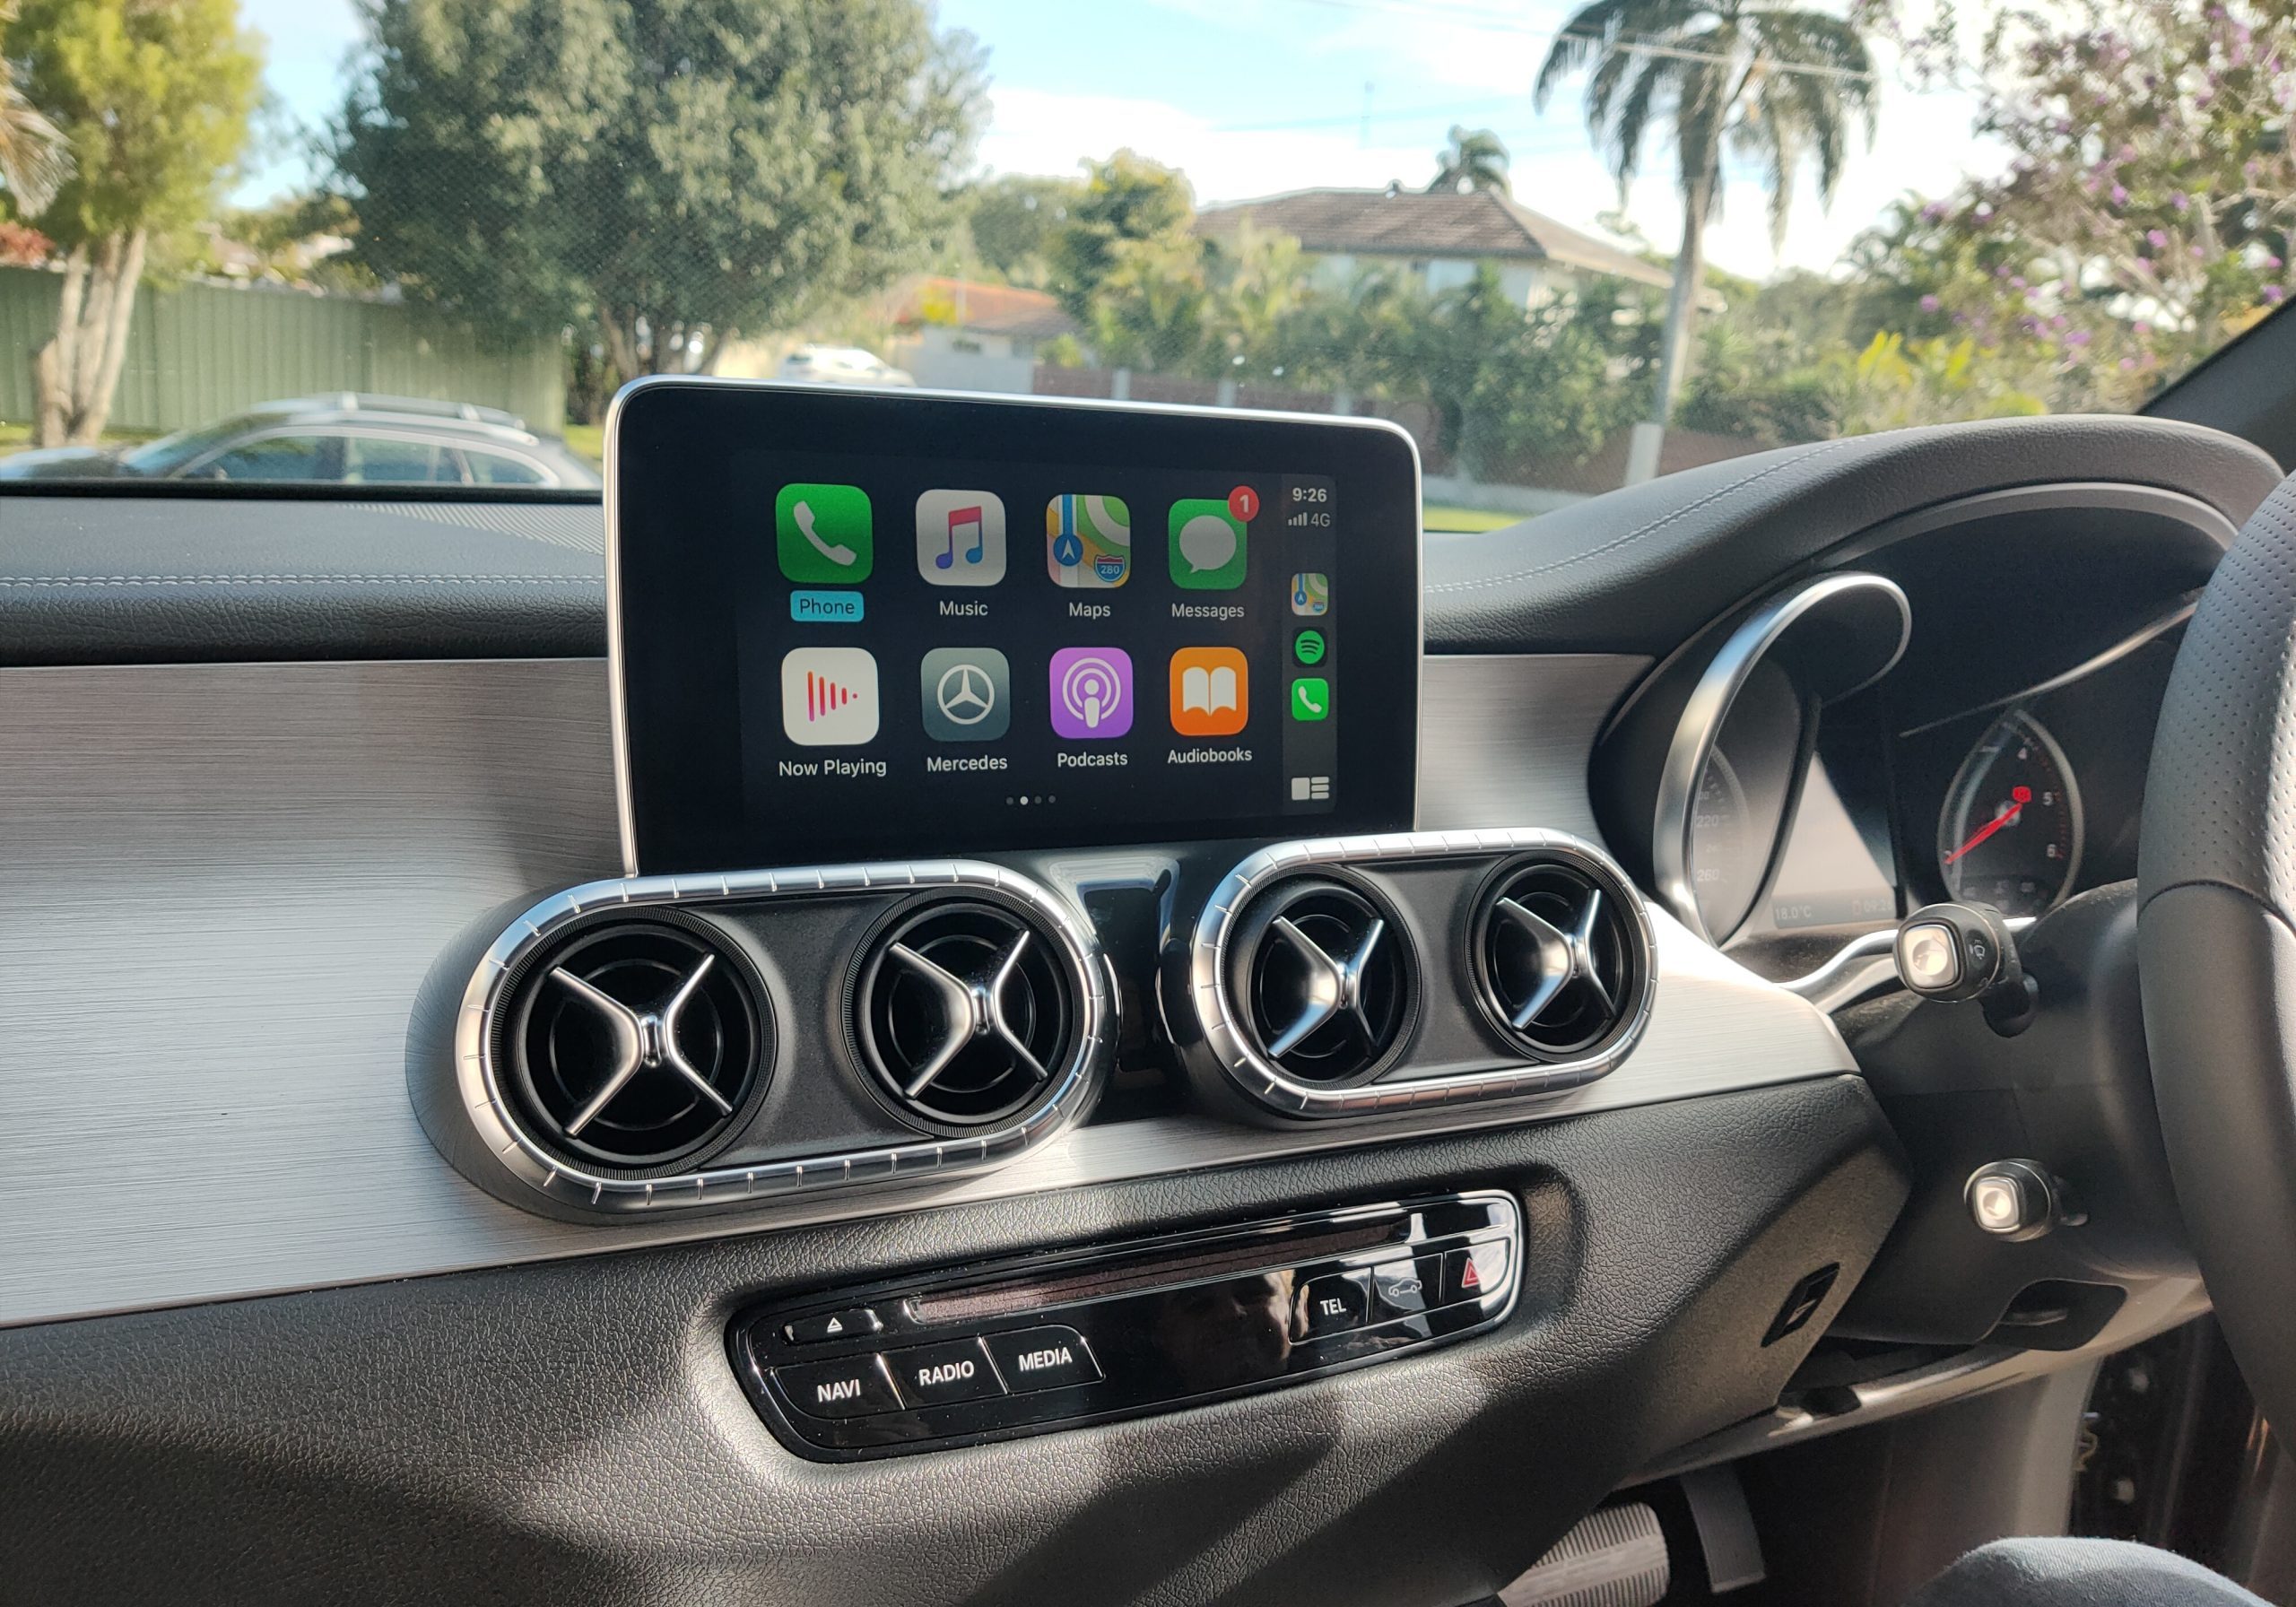 Mercedes Benz-3: NTG5 - OEM upgrade with Wireless Apple CarPlay and Android Auto